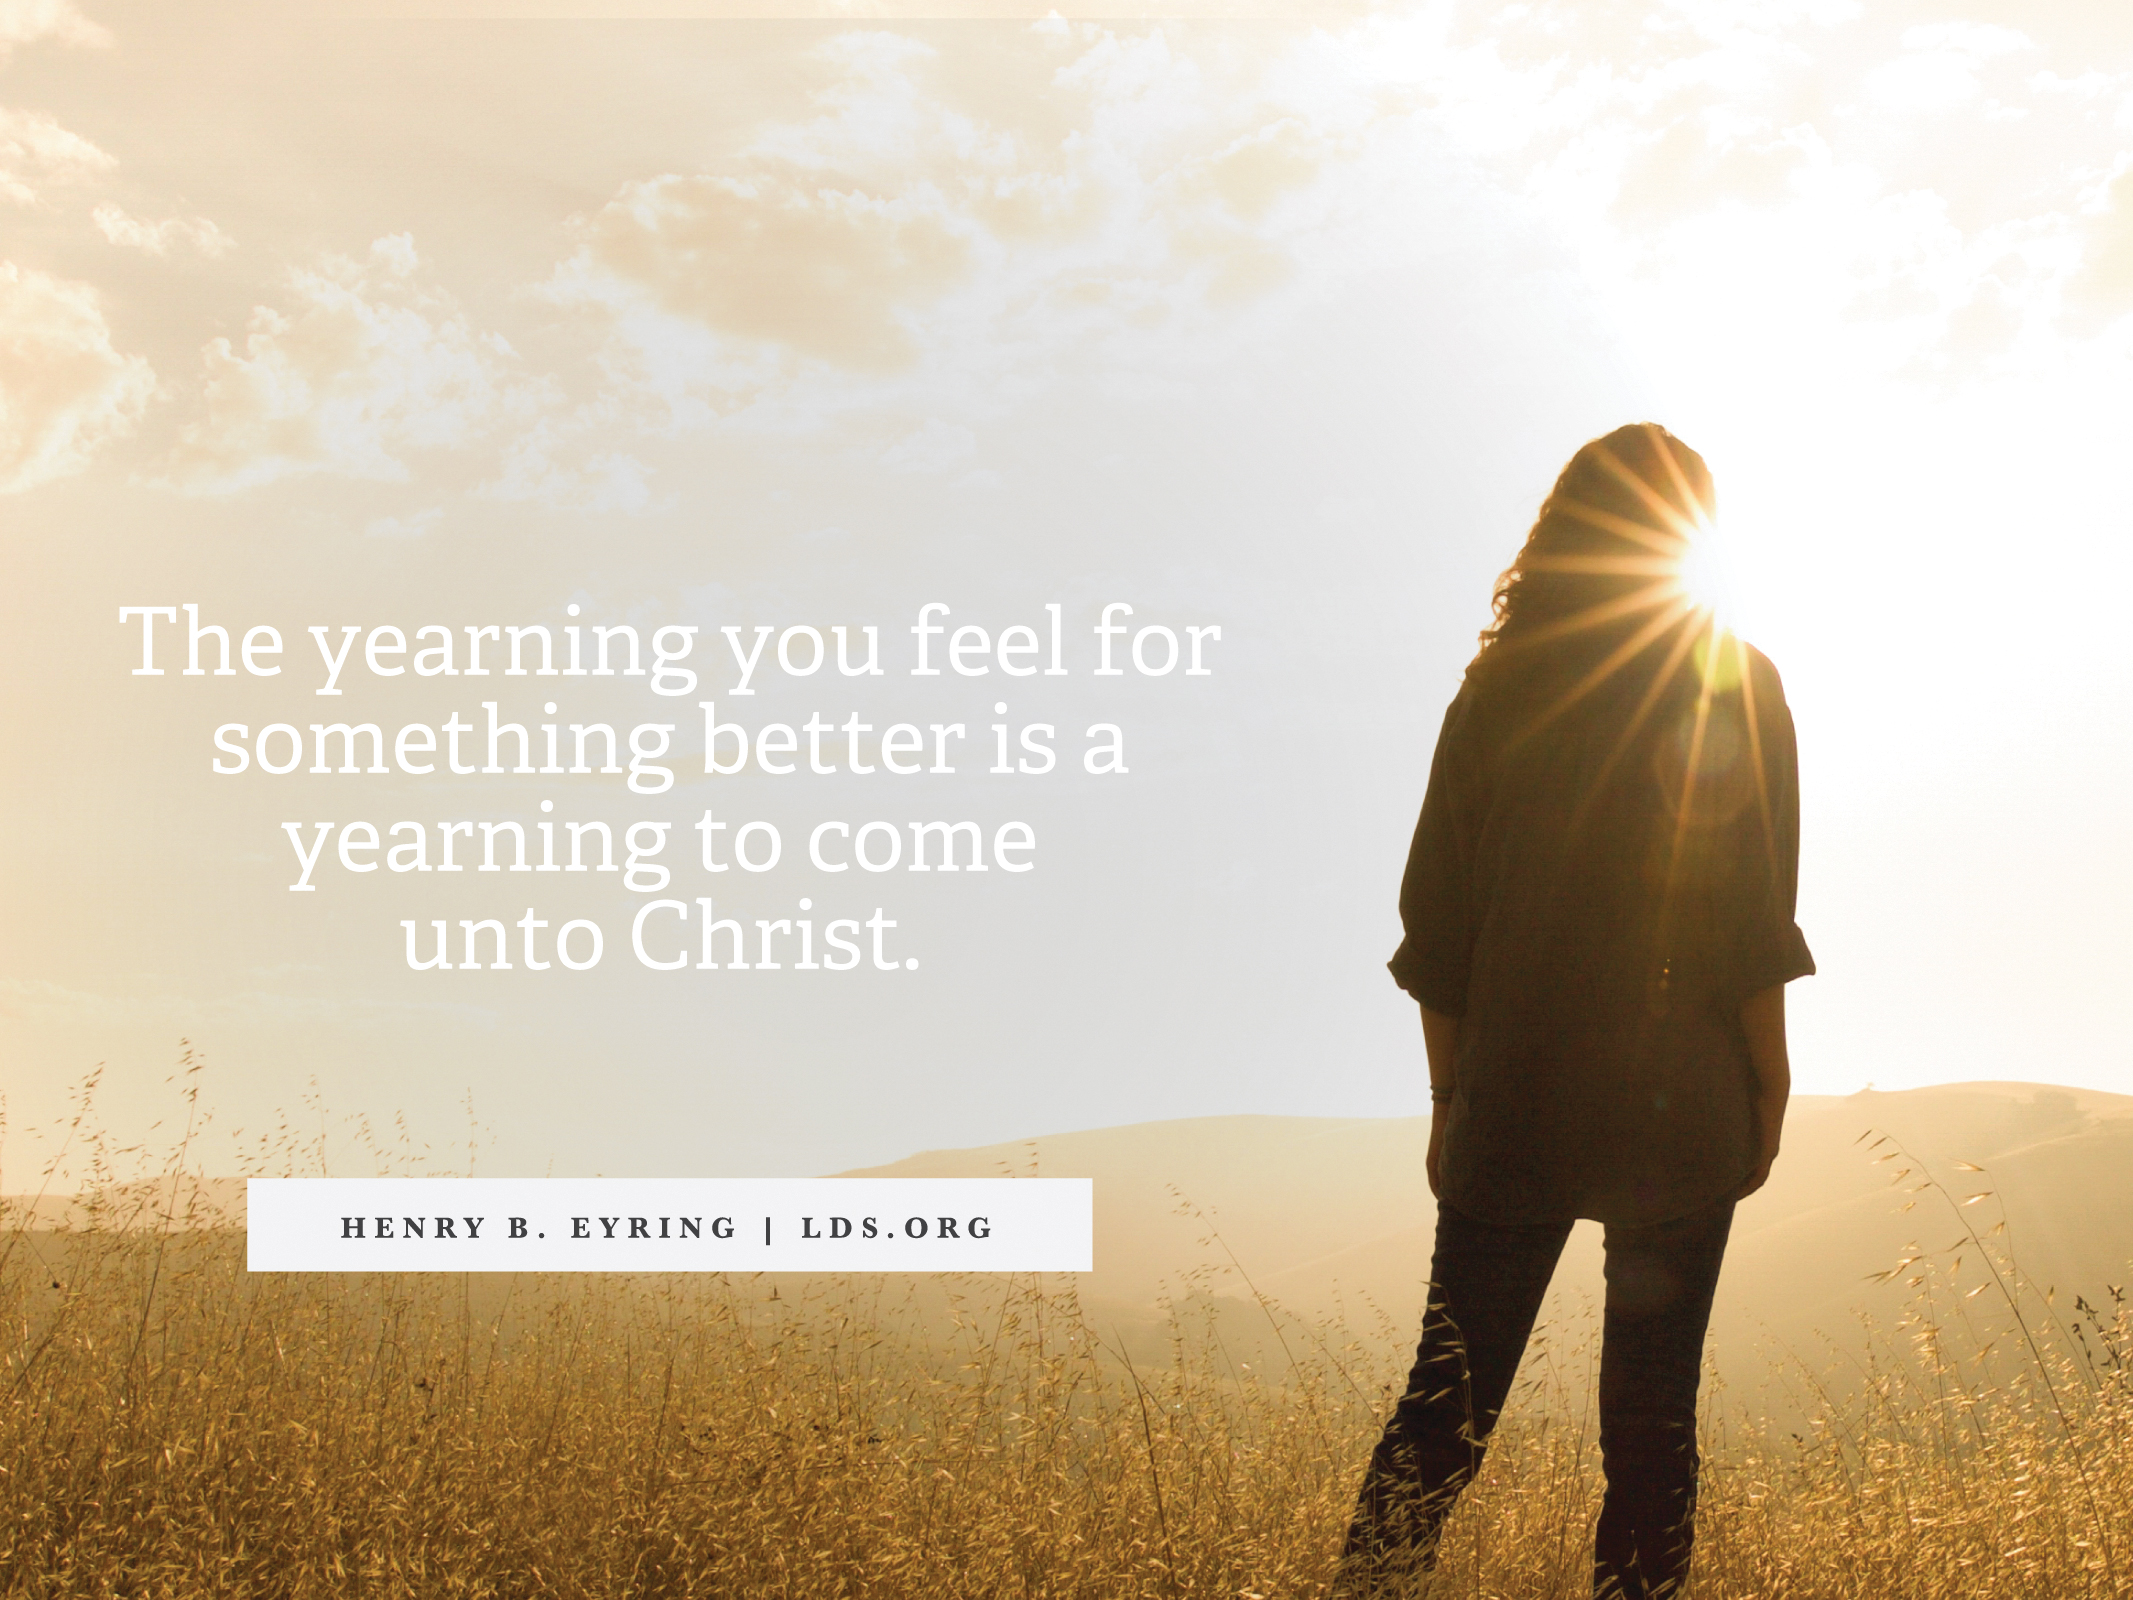 A woman standing in a field and facing the sun, with a quote from President Henry B. Eyring: “Come unto Christ.”